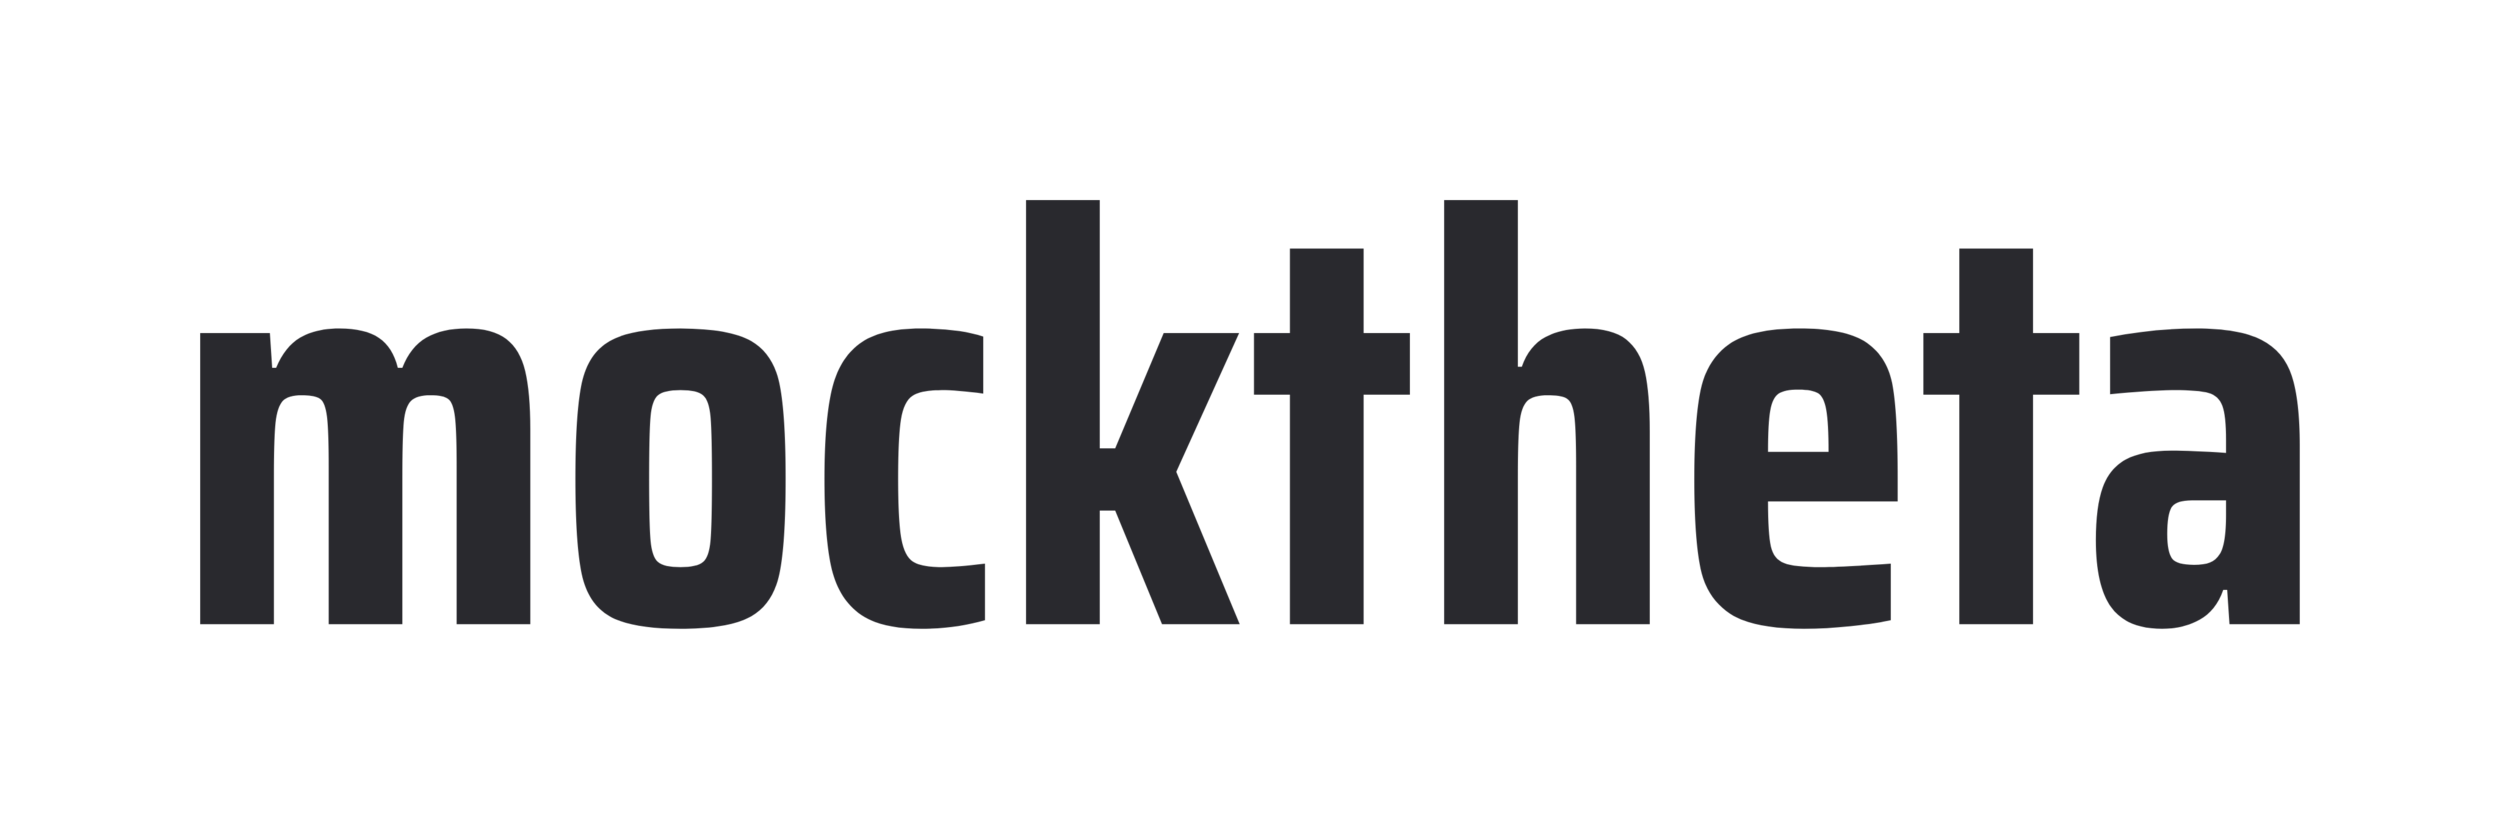 MockTheta Inc | Building next-gen technology products for today.